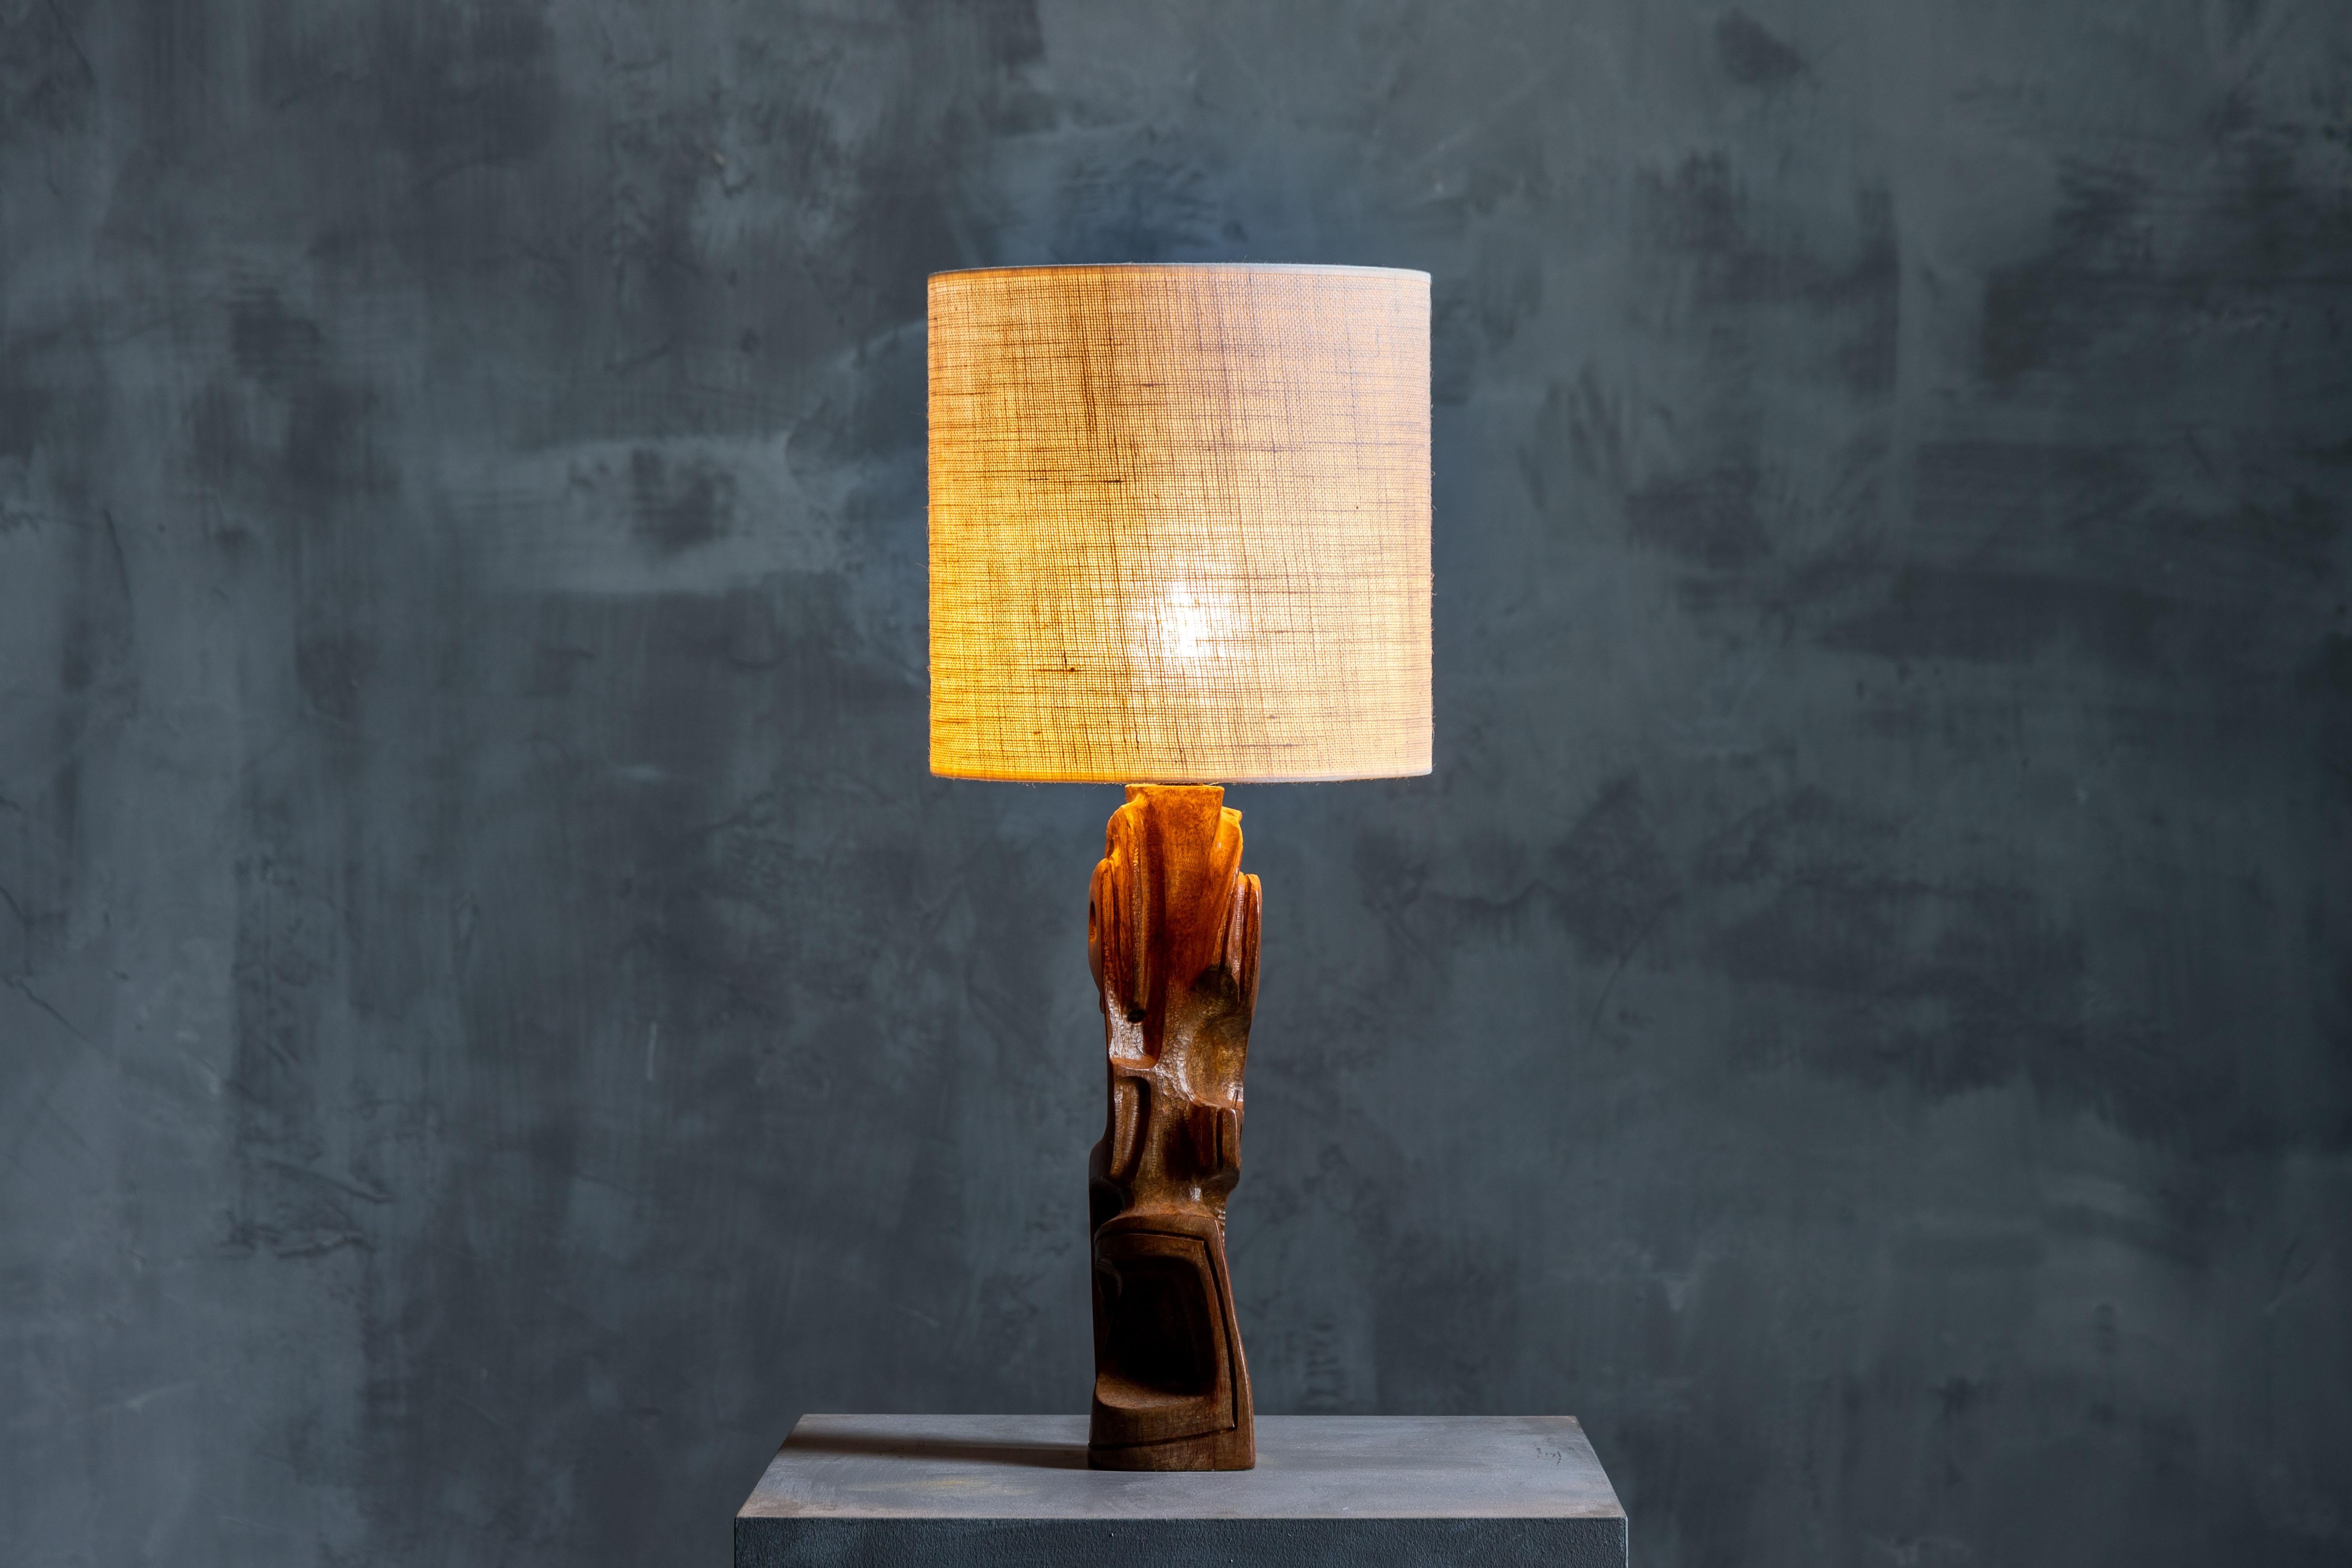 Gianni Pinna's sculpted table lamp from 1970s Italy, crafted from Legno Padouk wood. It showcases a rugged and brutalist aesthetic that captivates the senses. Embodying an era of bold design and artistic expression, this lamp exudes an irresistible